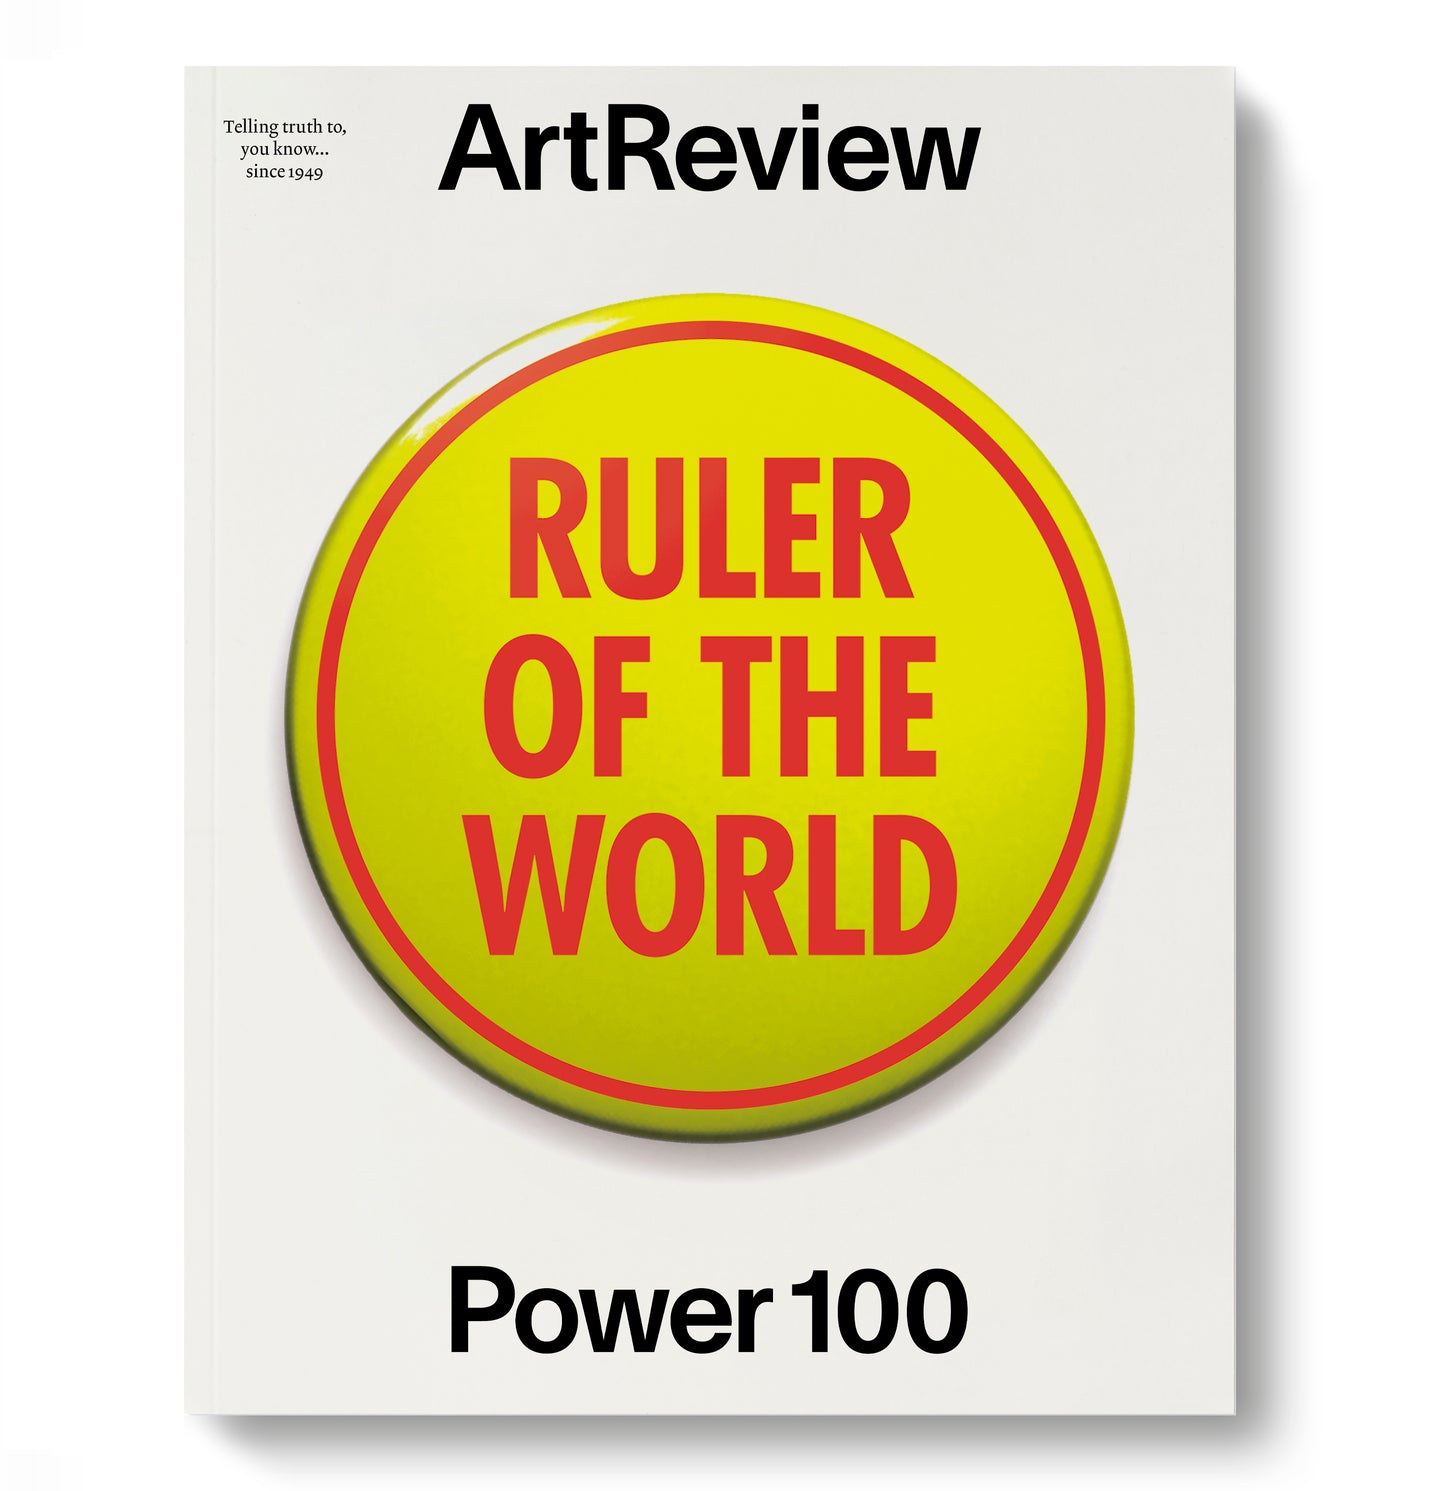 ArtReview November 2019 - Power 100